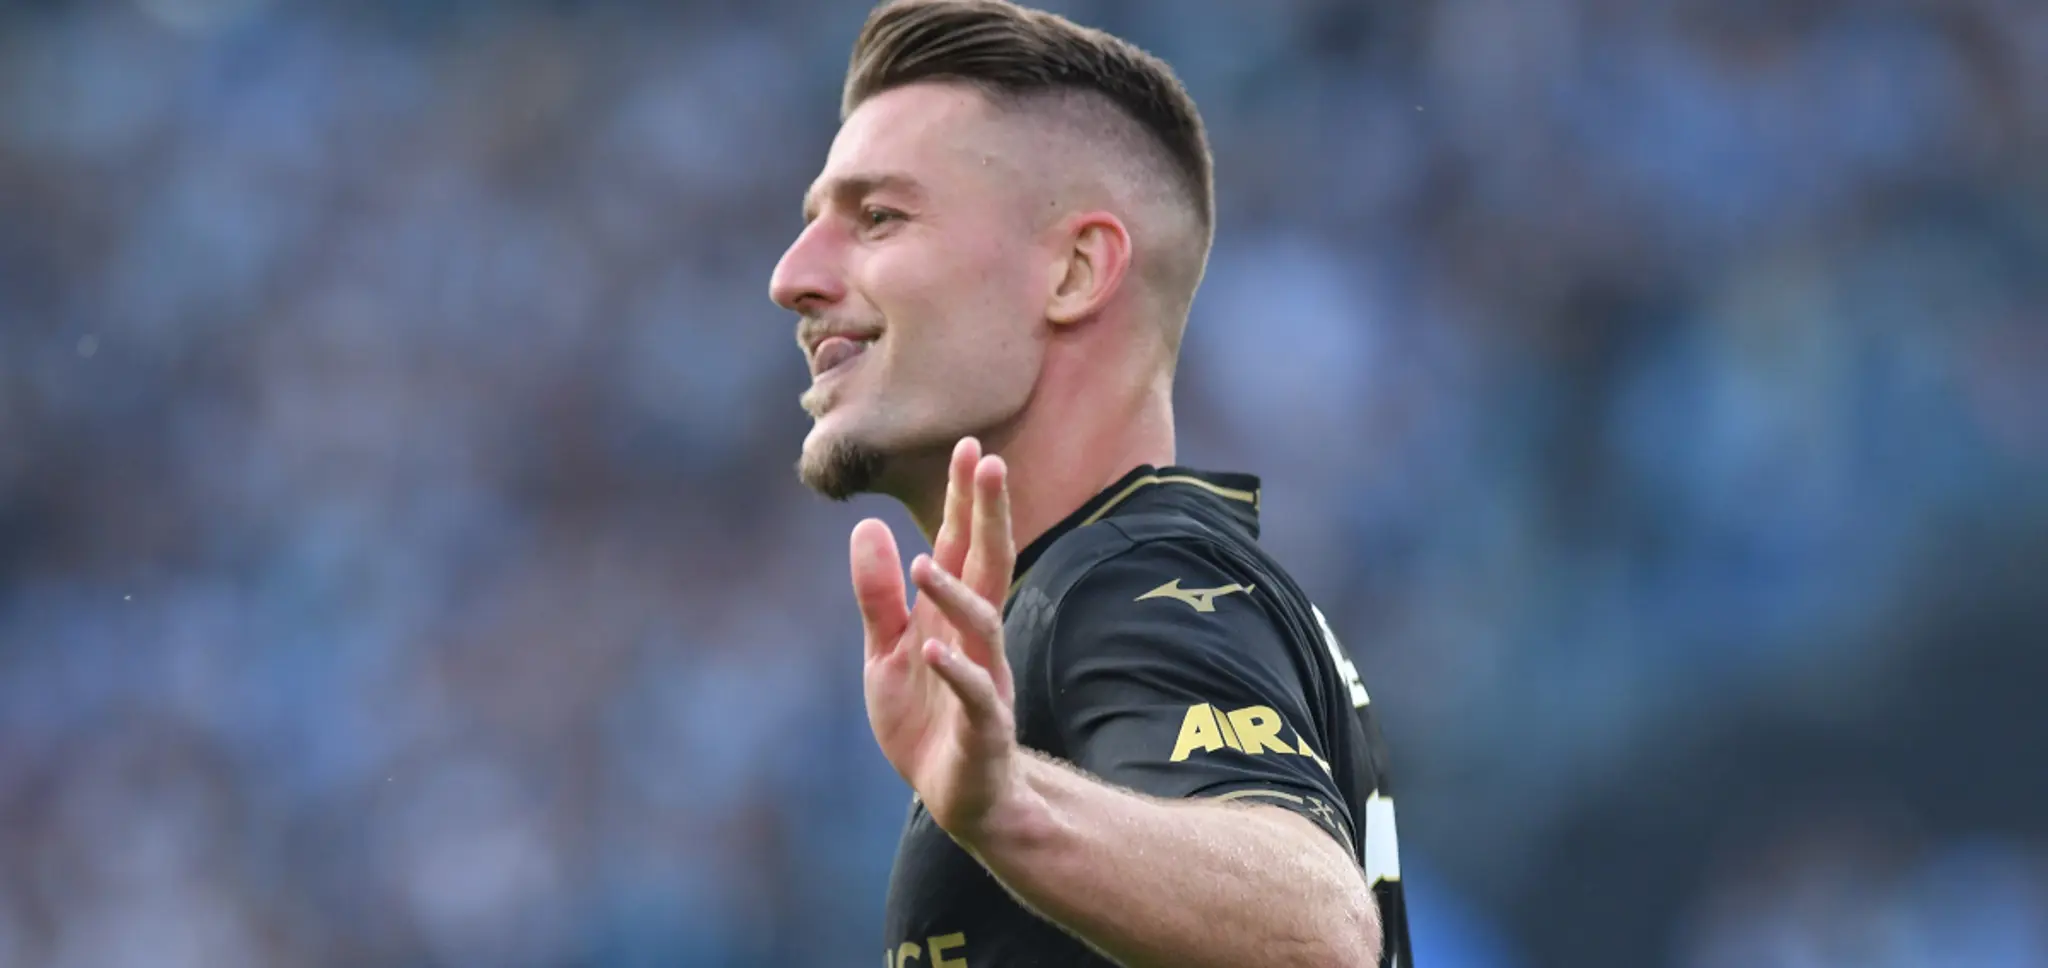 Juventus hold out hope their long-time target Sergej Milinkovic-Savic will force his way out of Saudi Arabia, more likely in the summer.